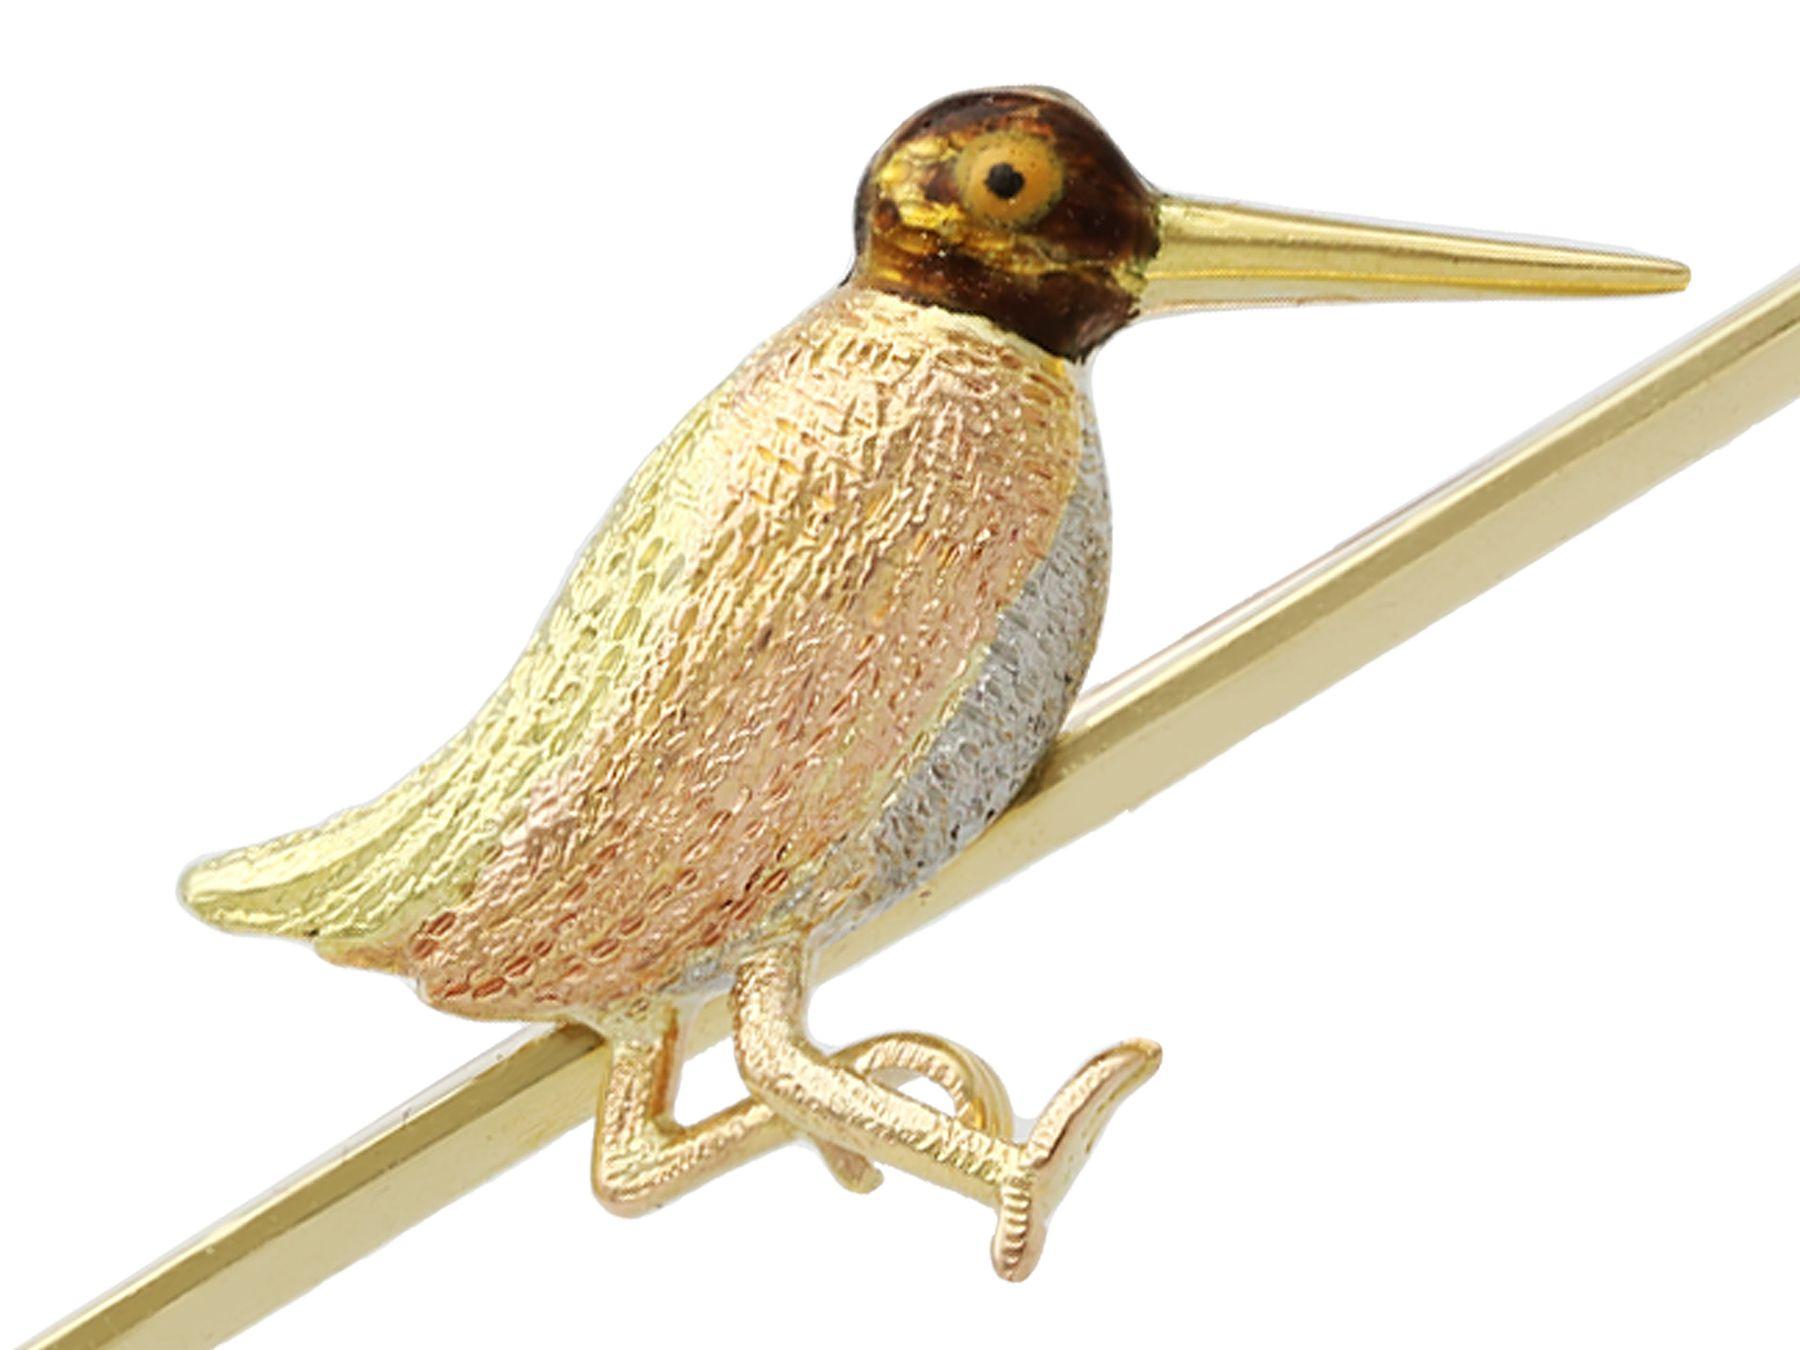 An impressive antique 1930s enamel, platinum, 15 karat rose and yellow gold bird brooch in the form of a snipe; part of our diverse enamel jewelry and estate jewelry collections.

This fine and impressive antique brooch has been crafted in 15k